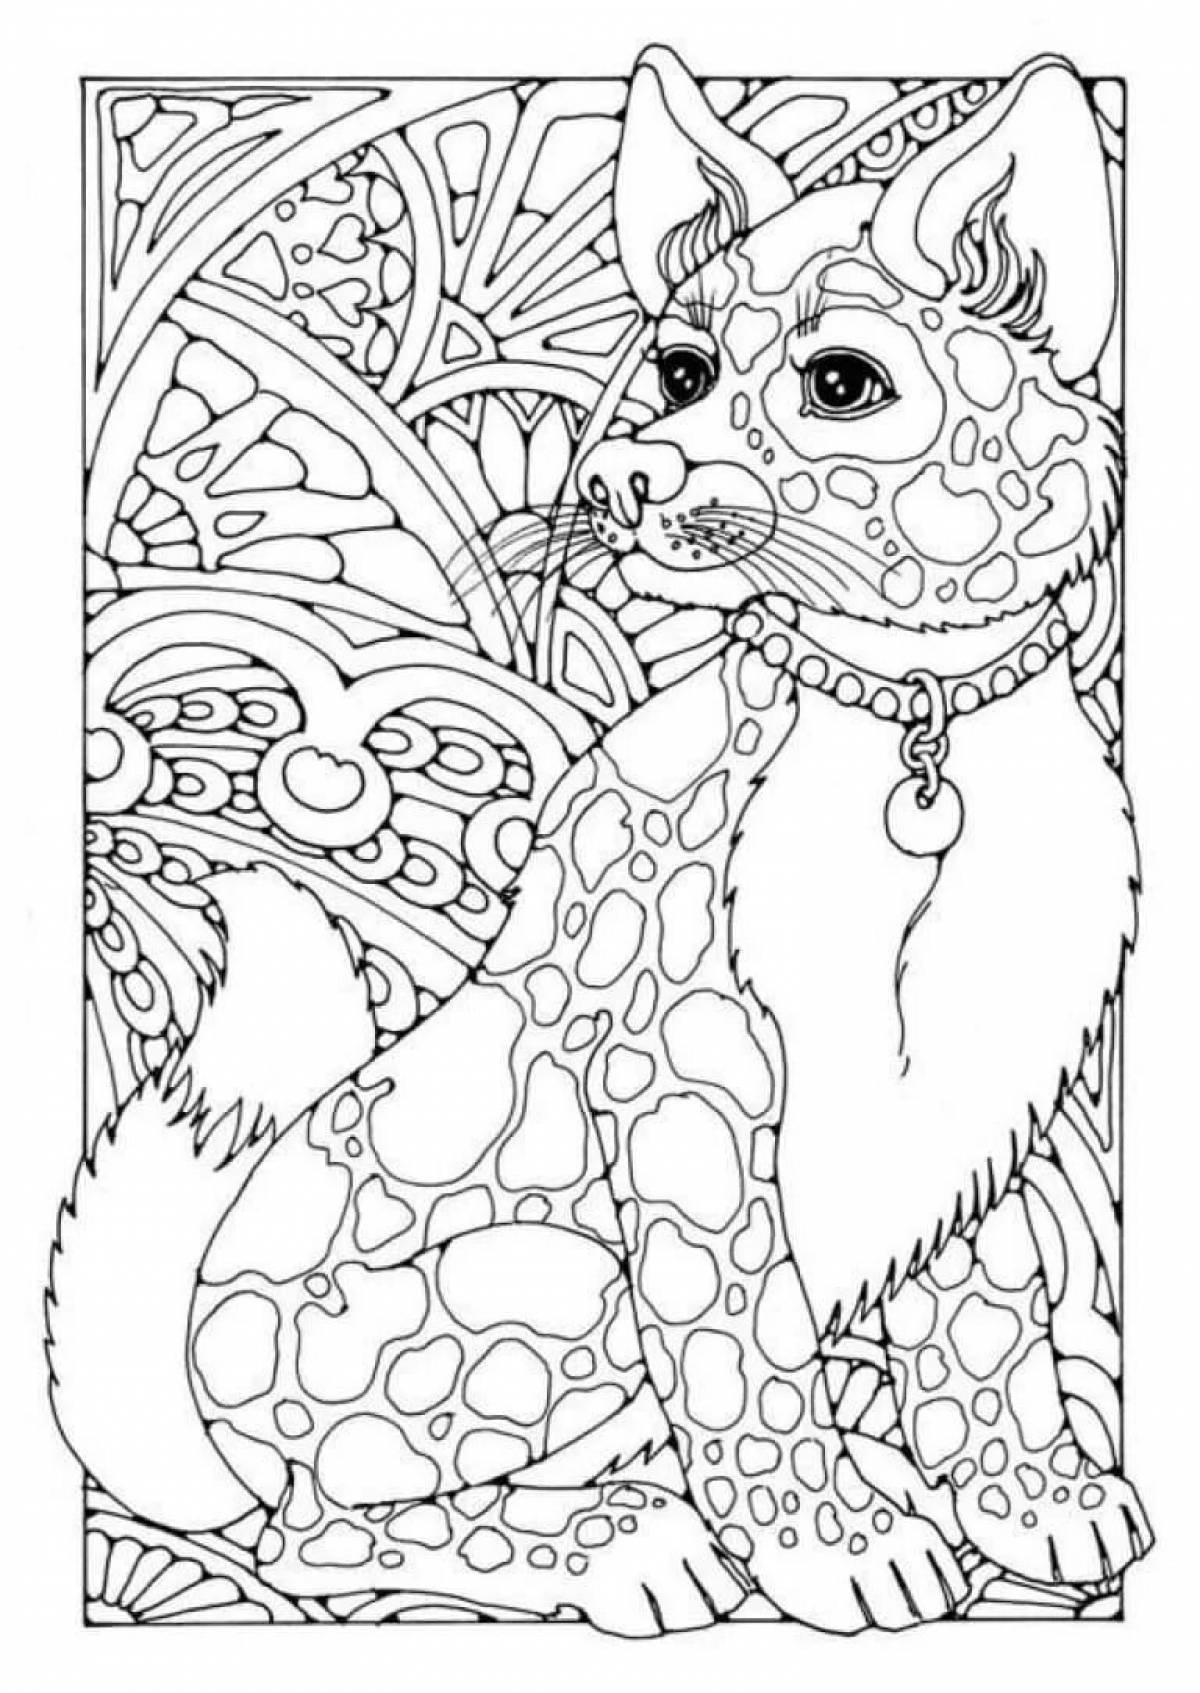 Adorable animal coloring book for adults